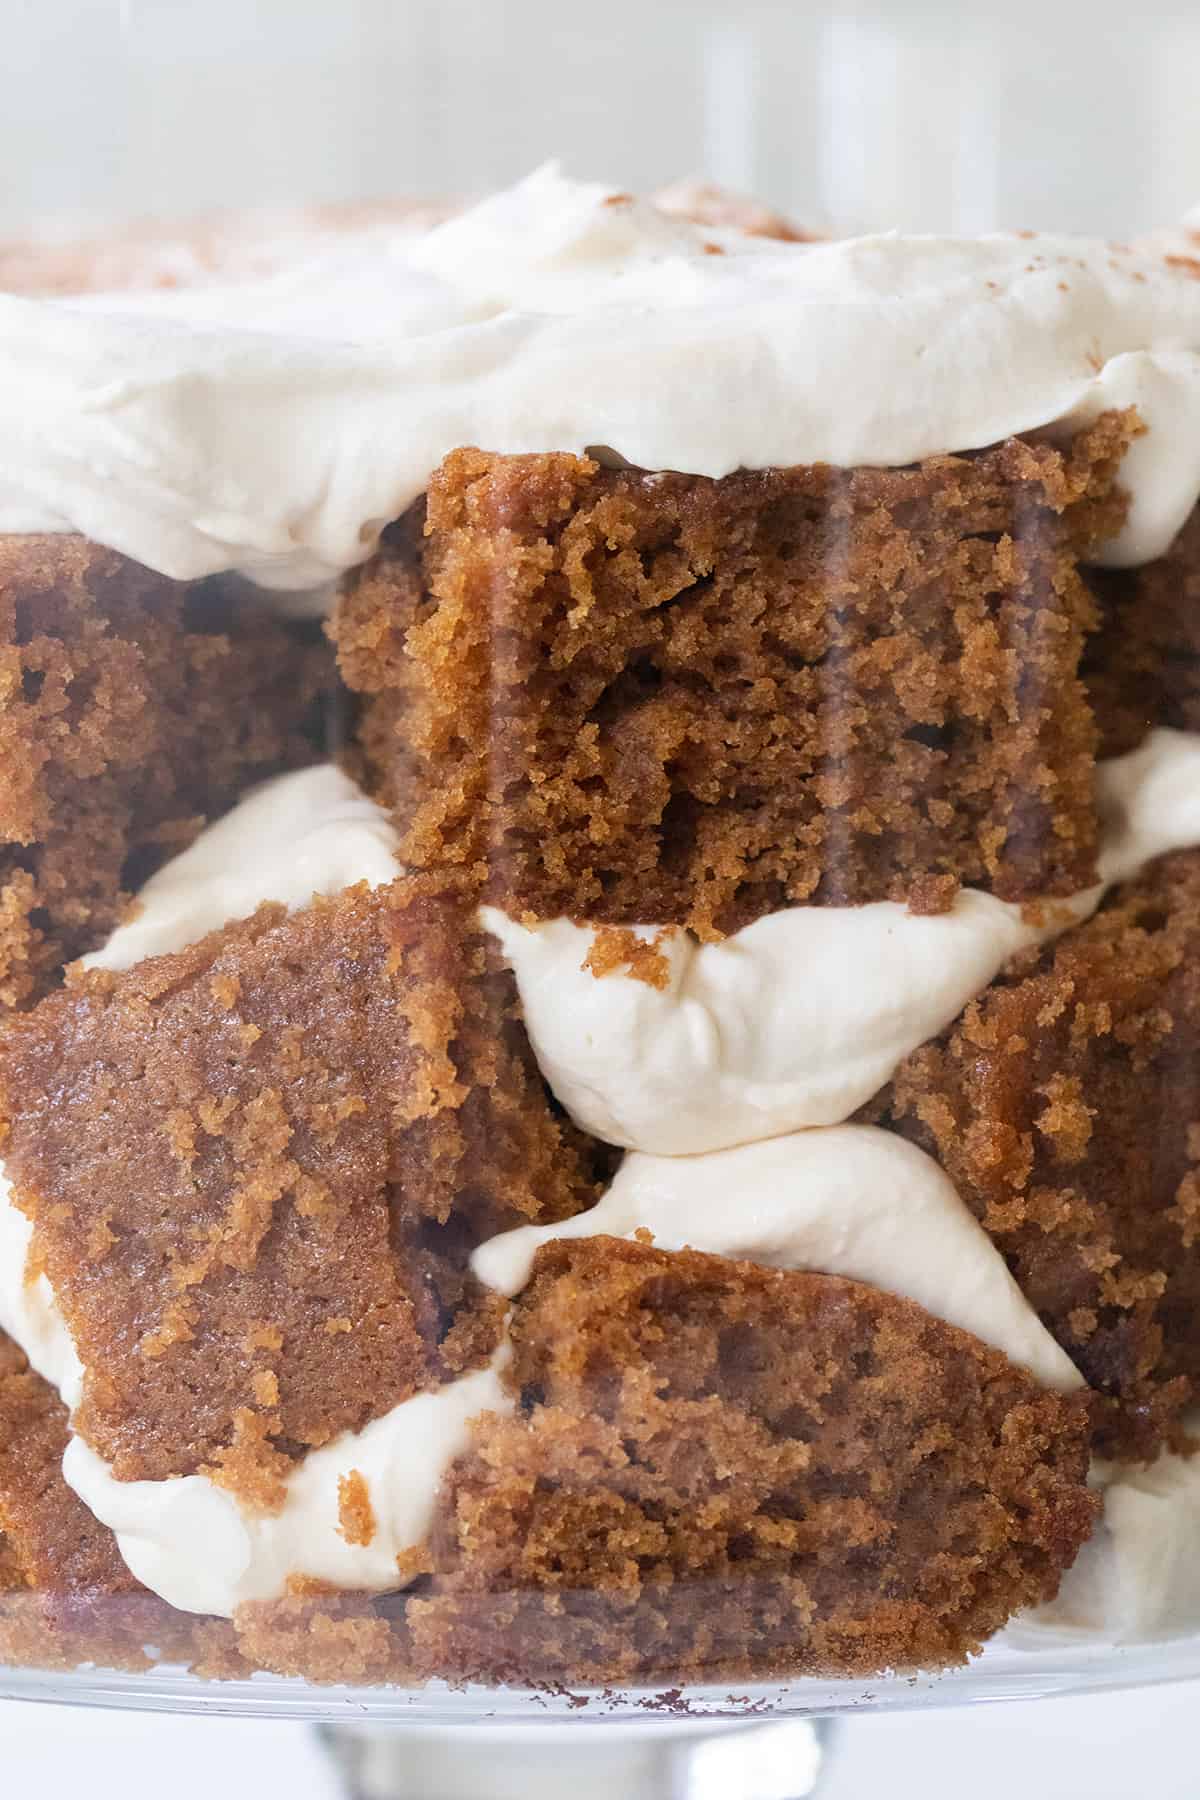 Fluffy gingerbread cake layered with whipped cream.